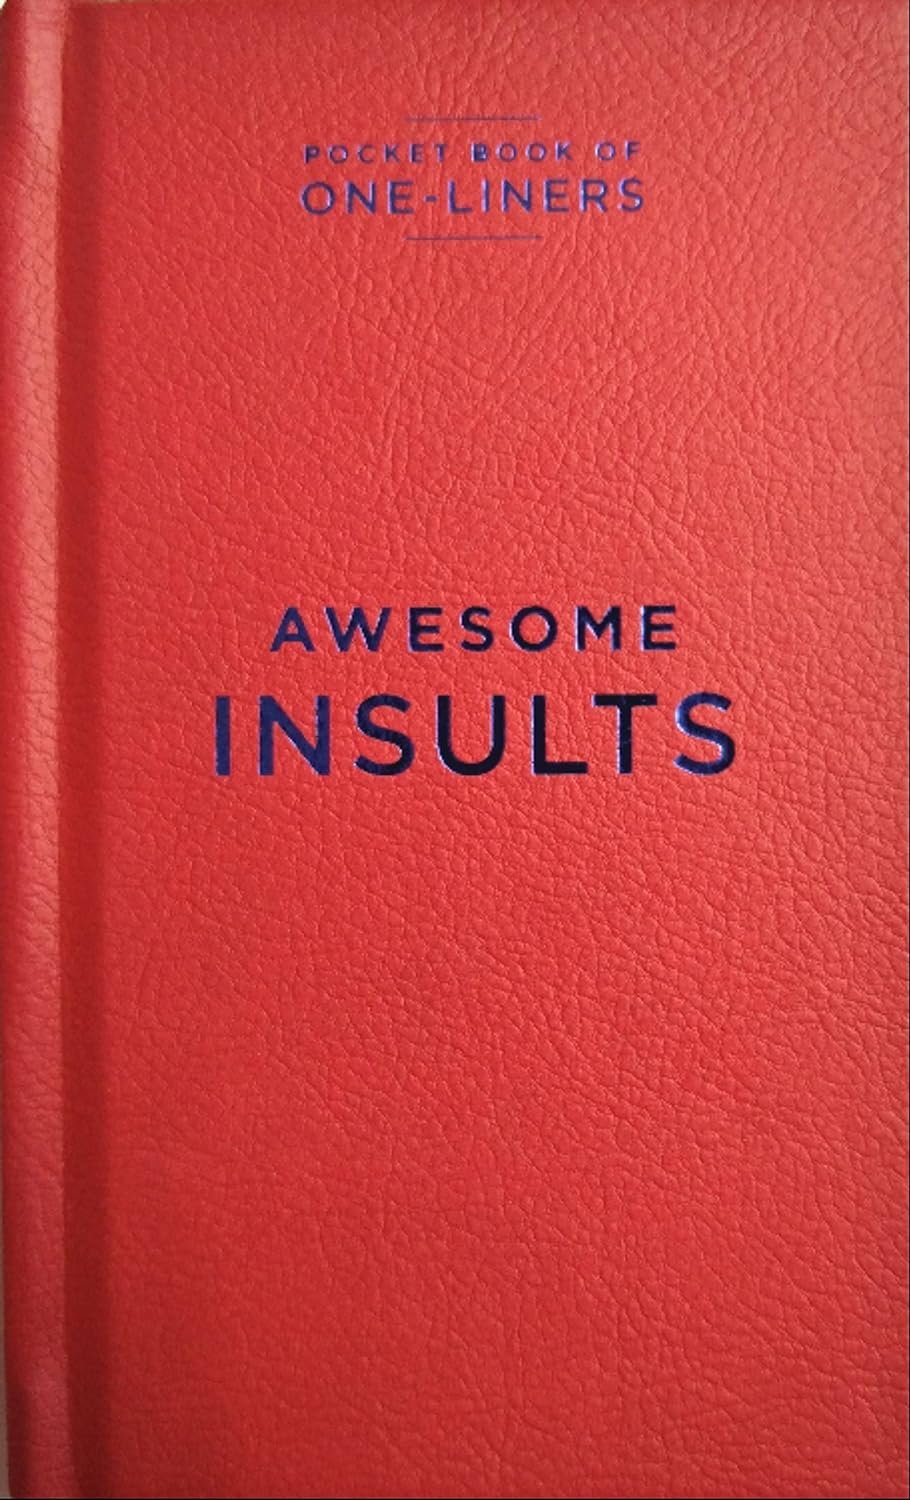 Book Gifts: Awesome Insults Book